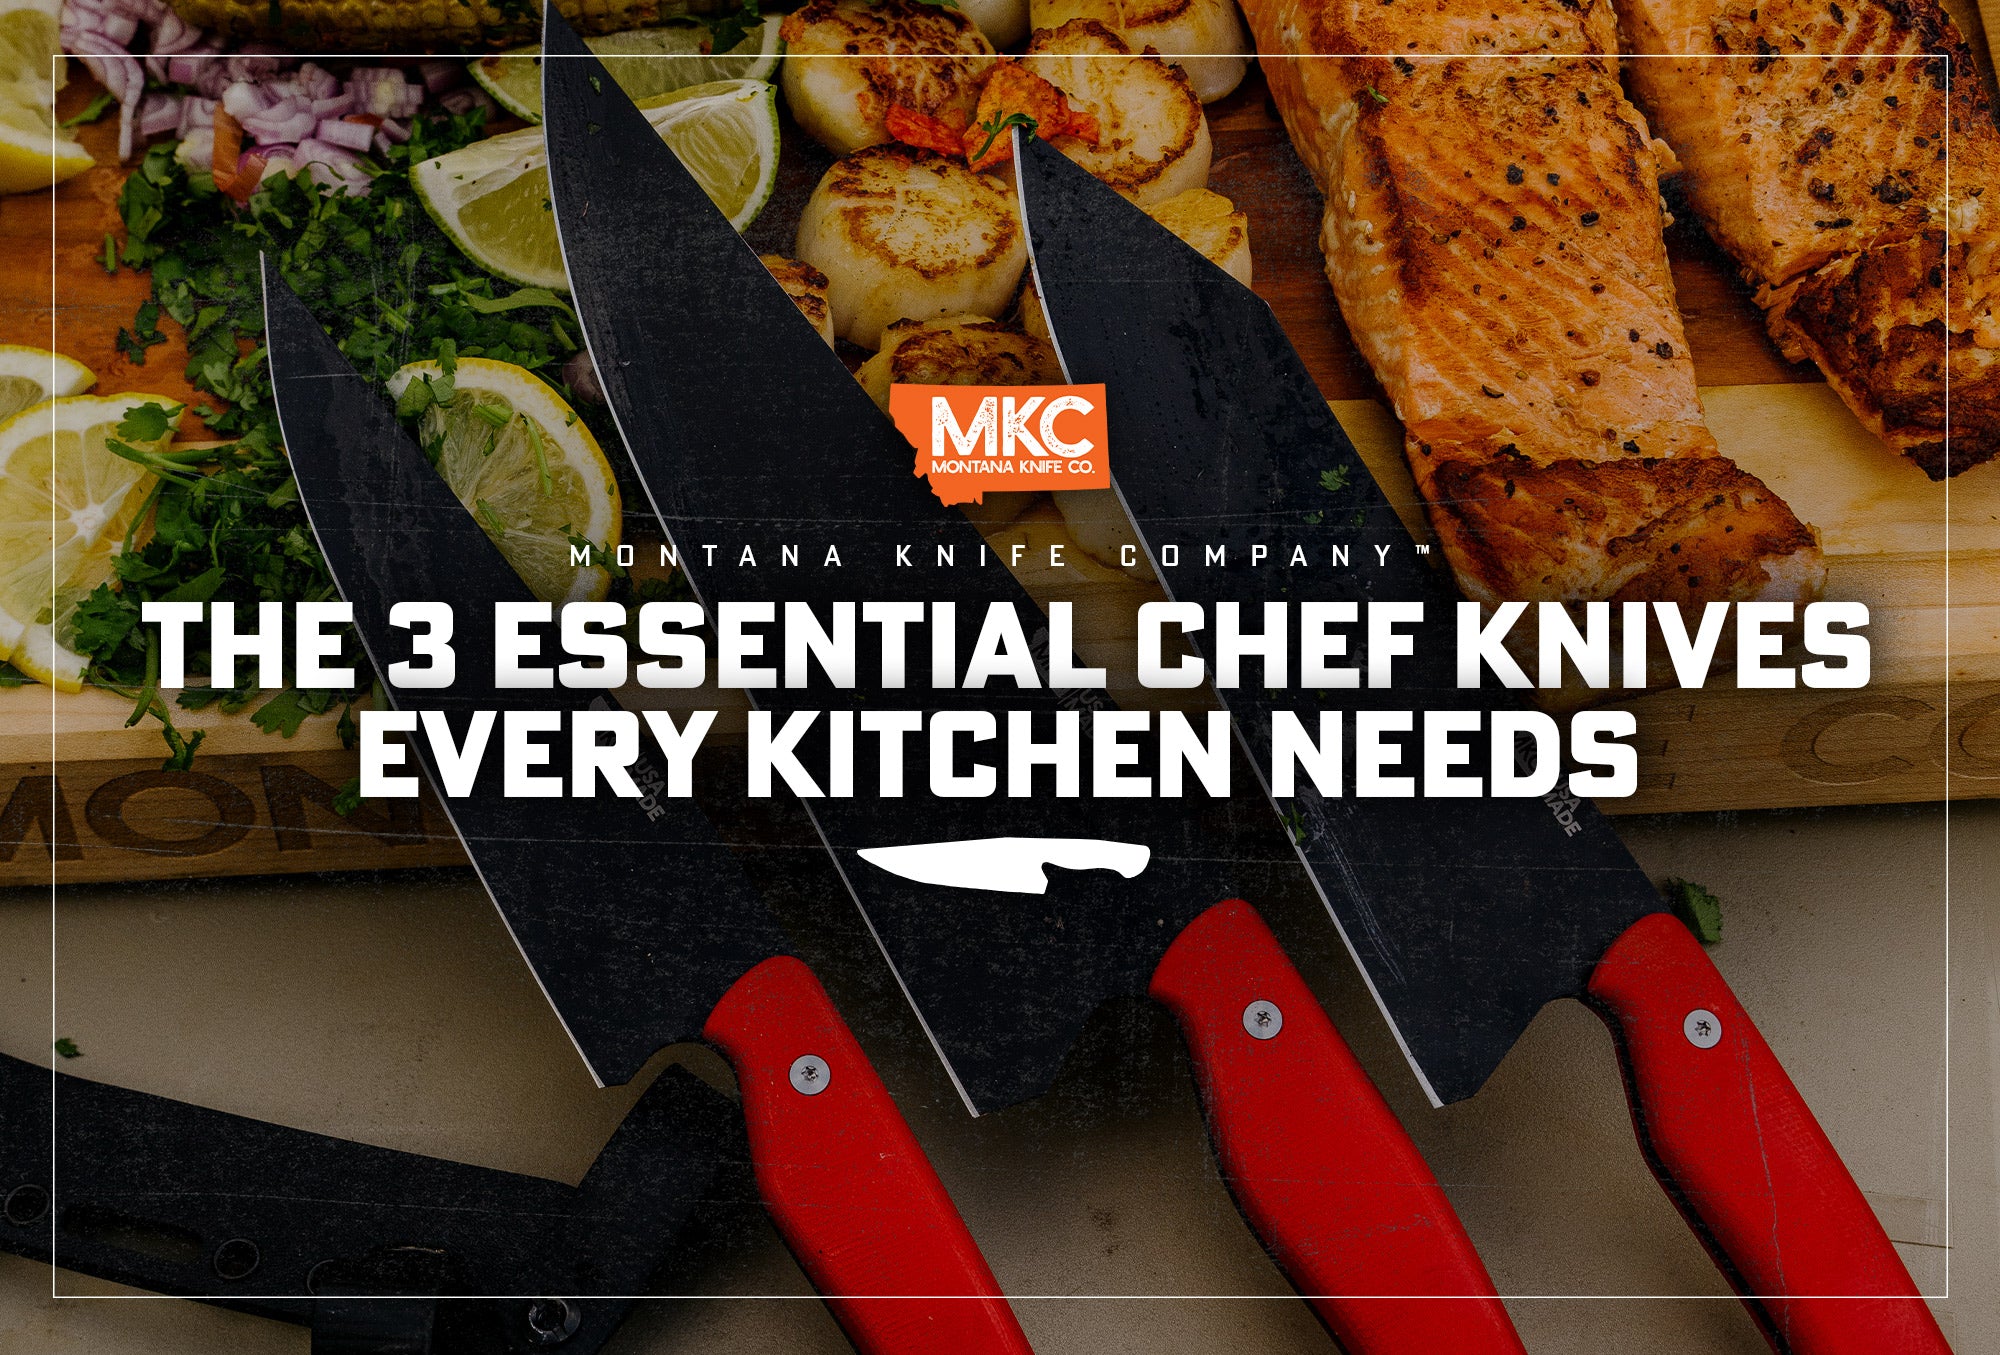 What knives are essential for a chef?